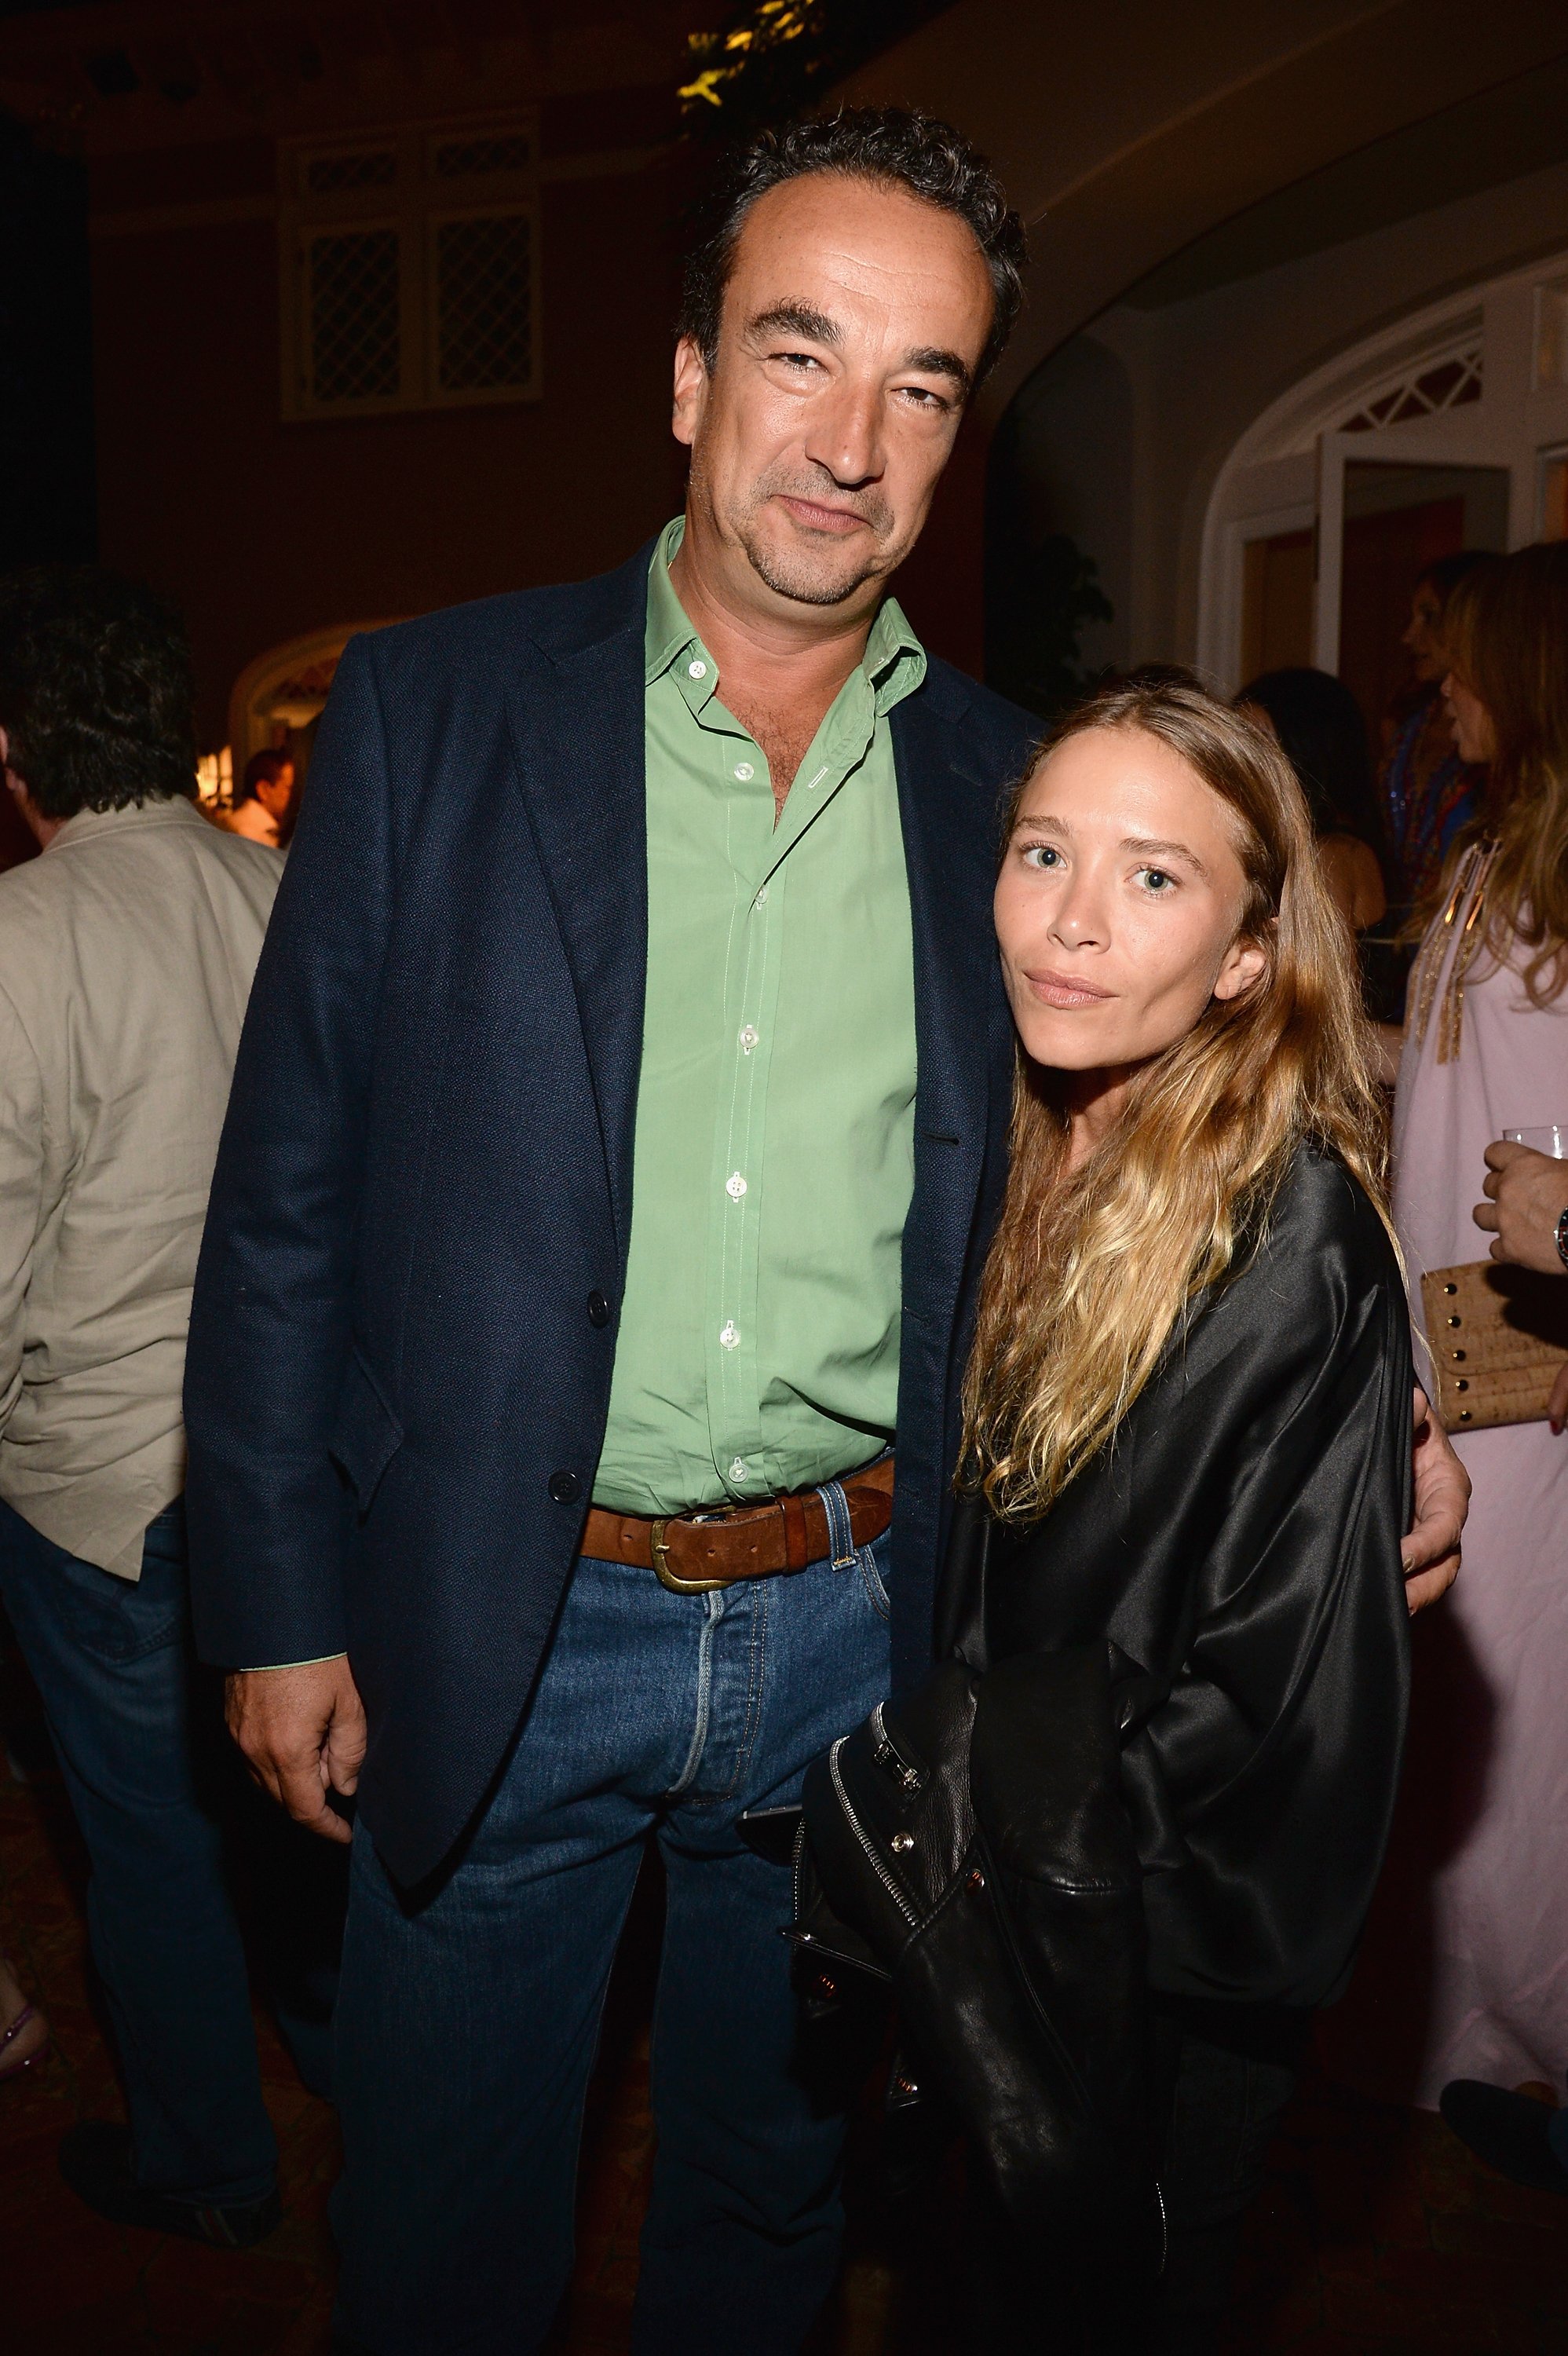 French banker Olivier Sarkozy and fashion designer Mary-Kate Olsen attending Apollo in the Hamptons 2015 at The Creeks on August 15, 2015 in East Hampton, New York. / Source: Getty Images